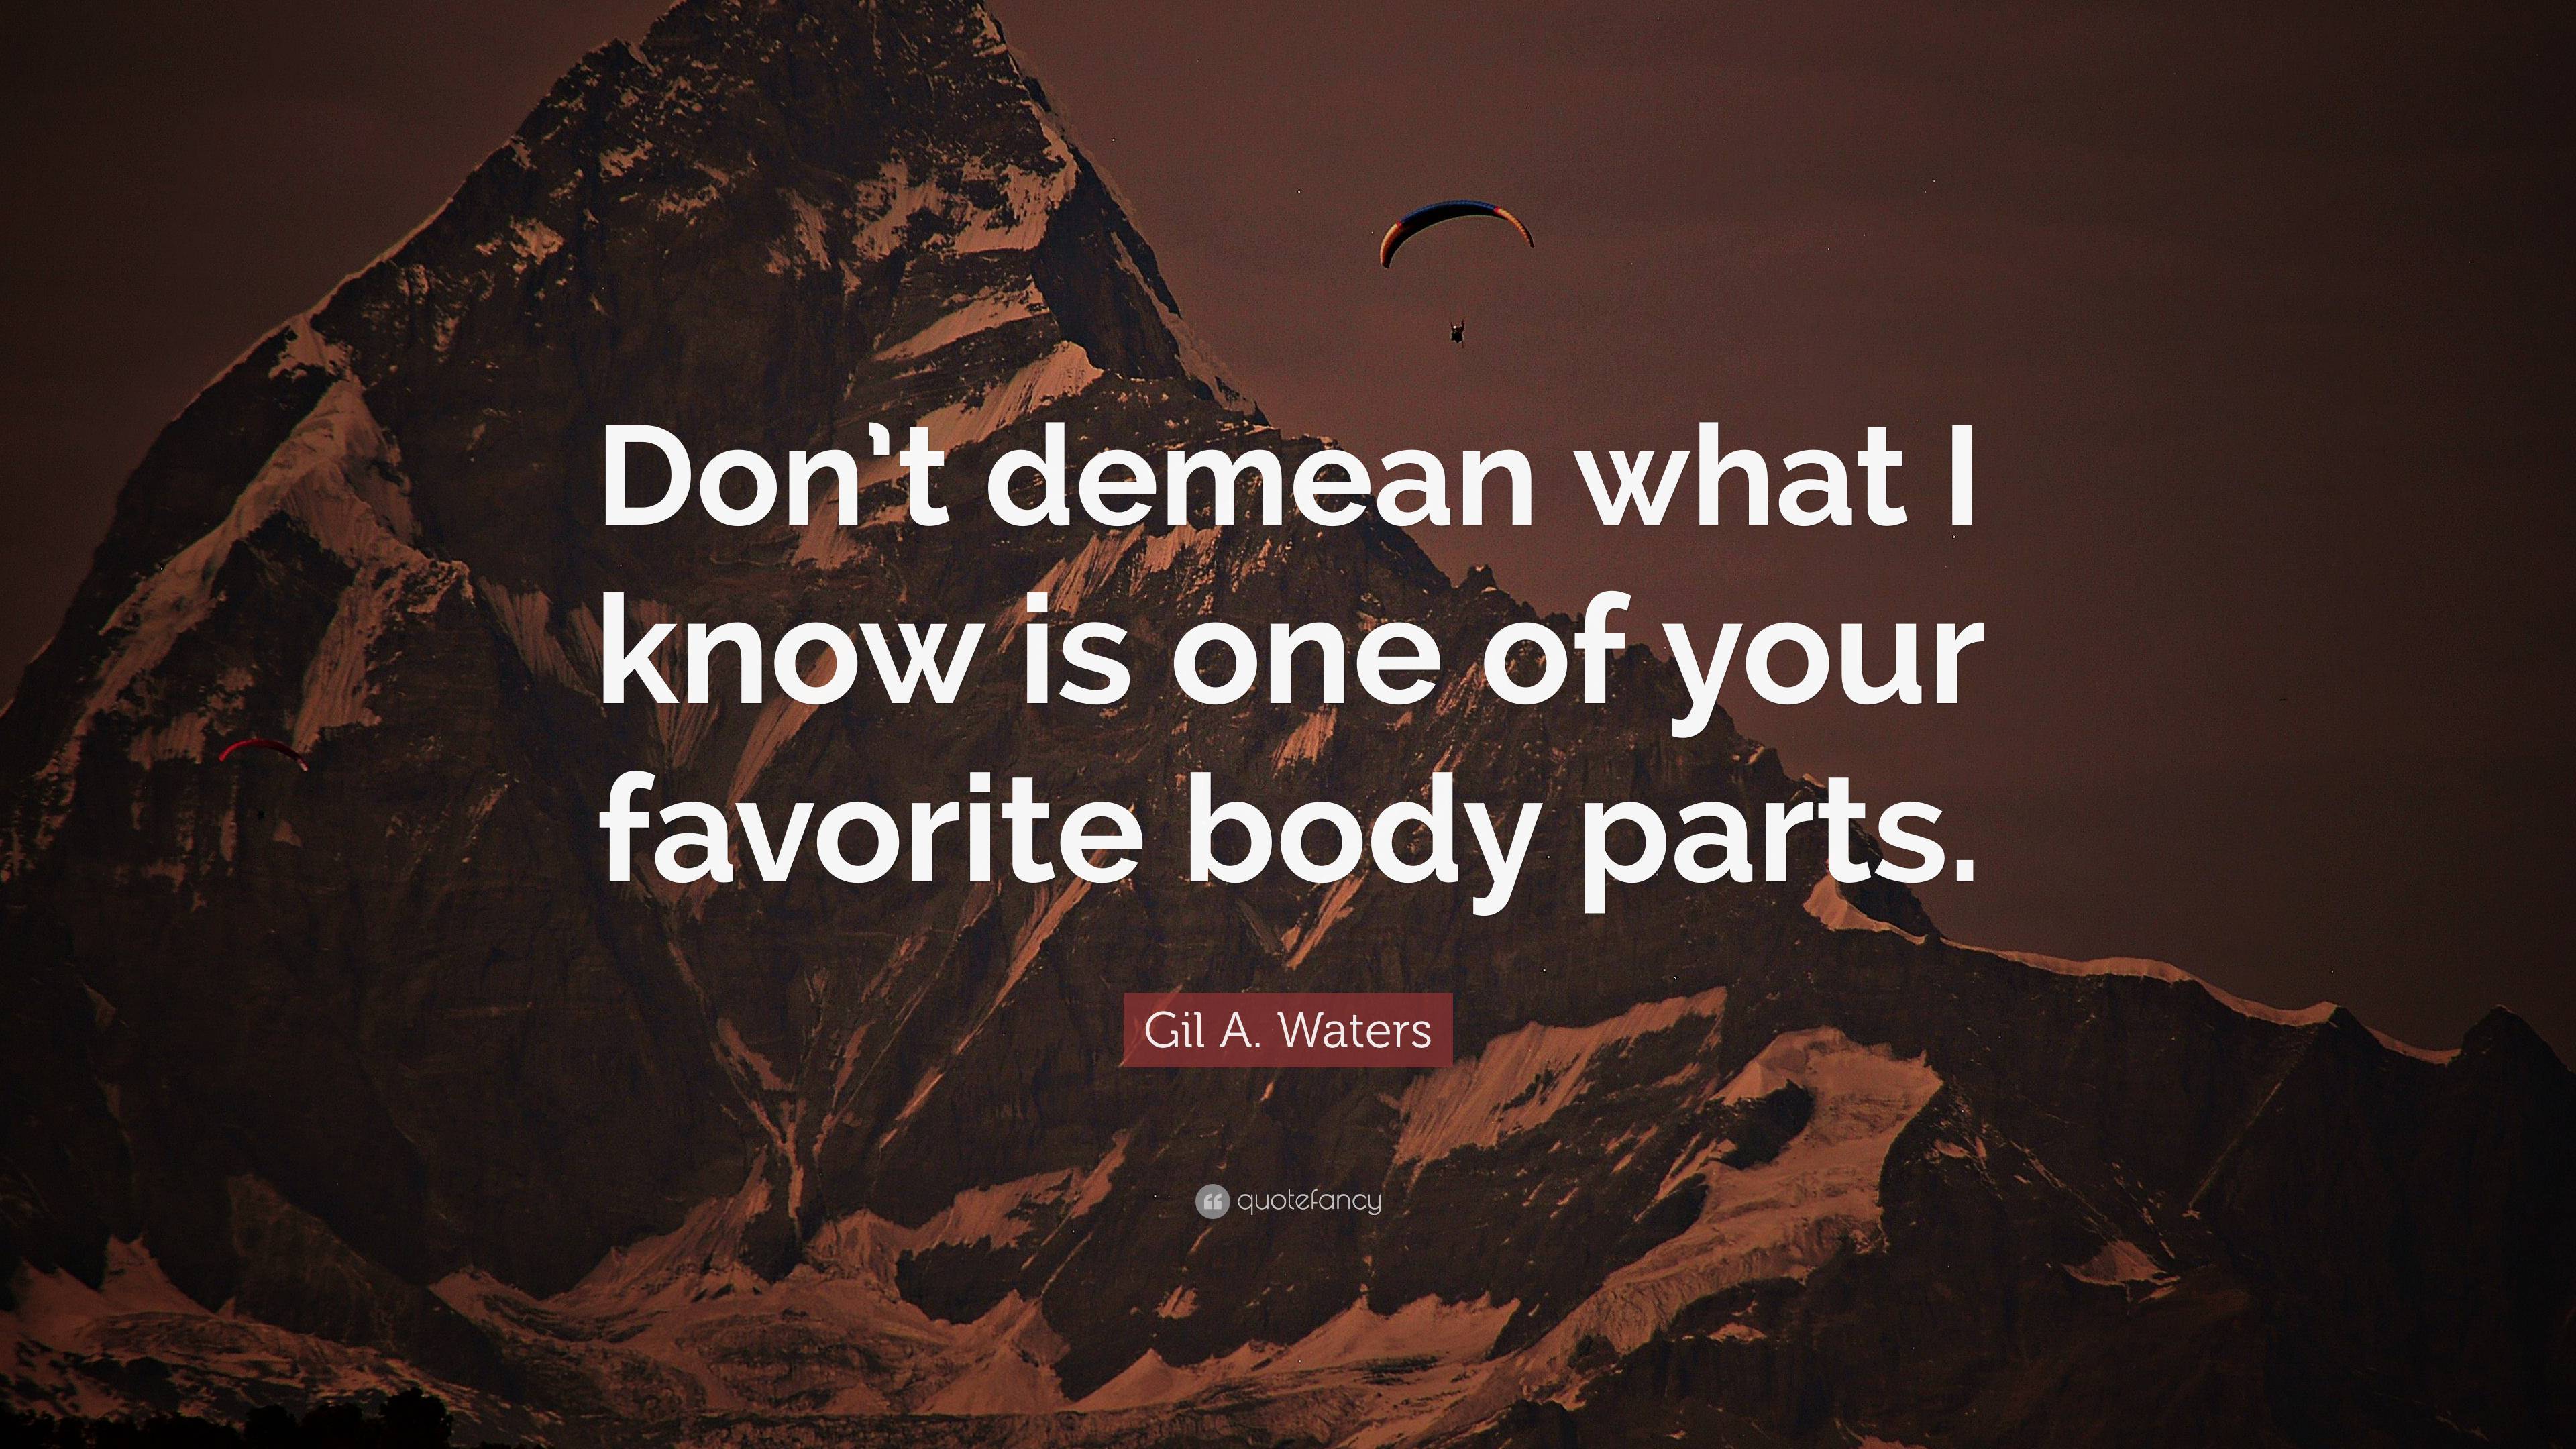 Gil A. Waters Quote: “Don’t demean what I know is one of your favorite ...